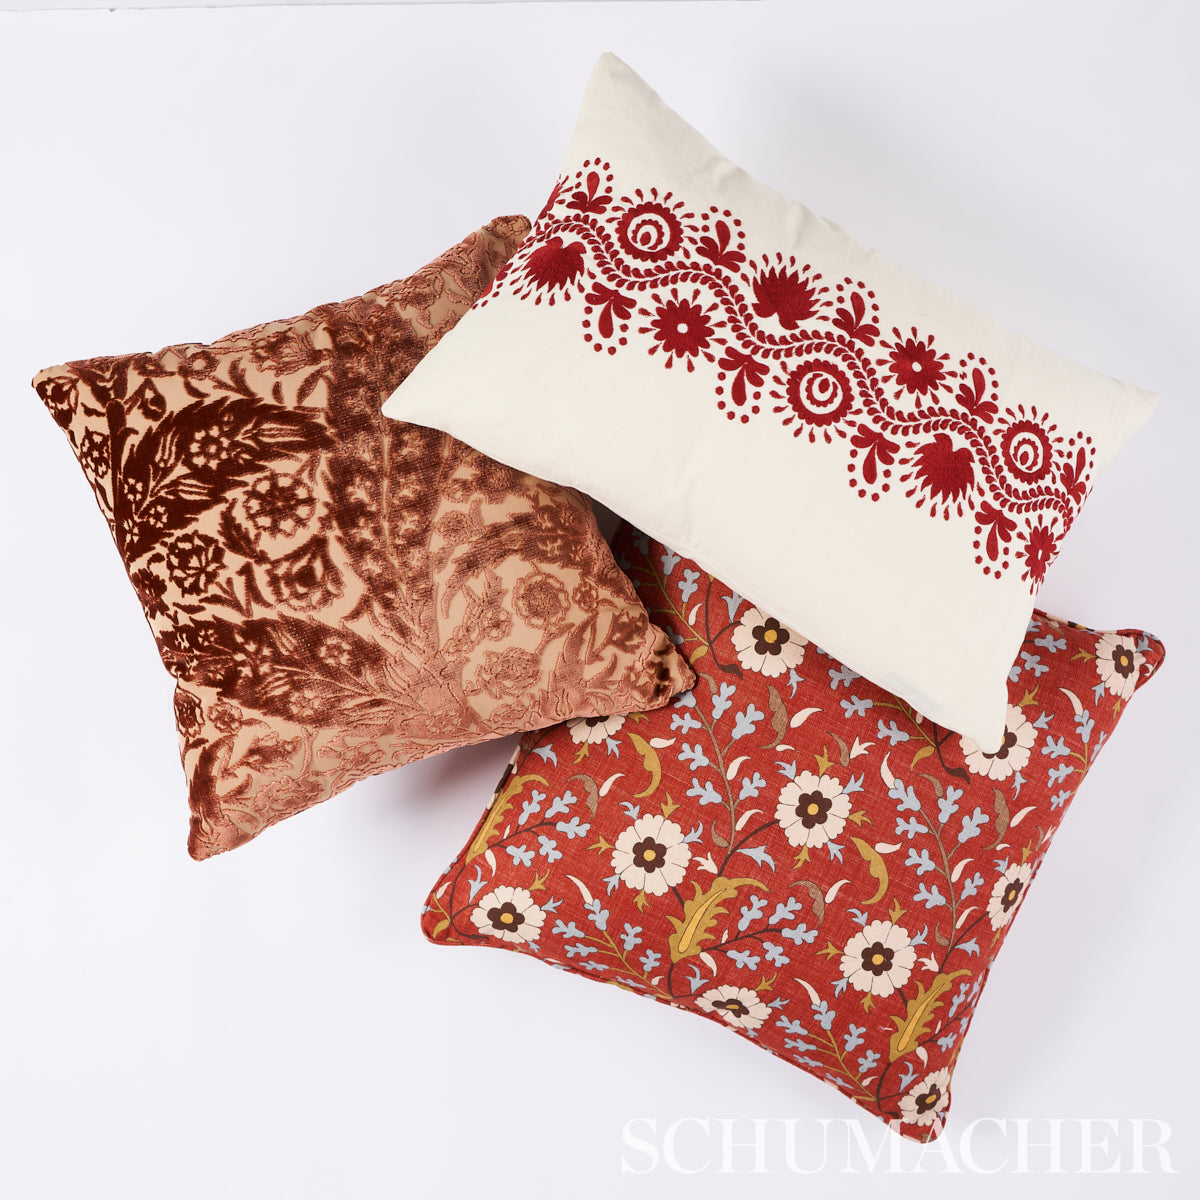 Theodora Embroidery Pillow | Red